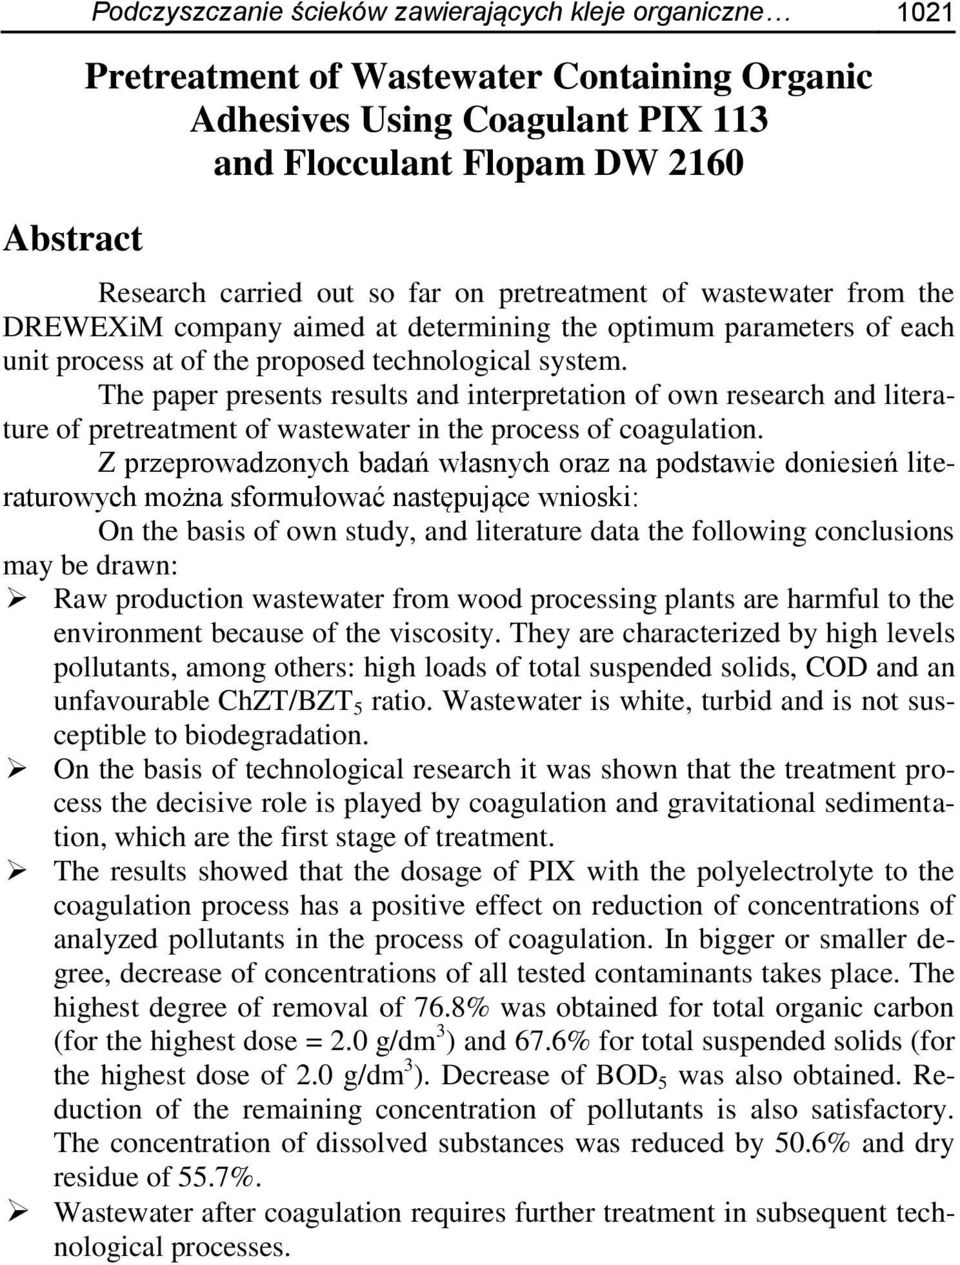 The paper presents results and interpretation of own research and literature of pretreatment of wastewater in the process of coagulation.